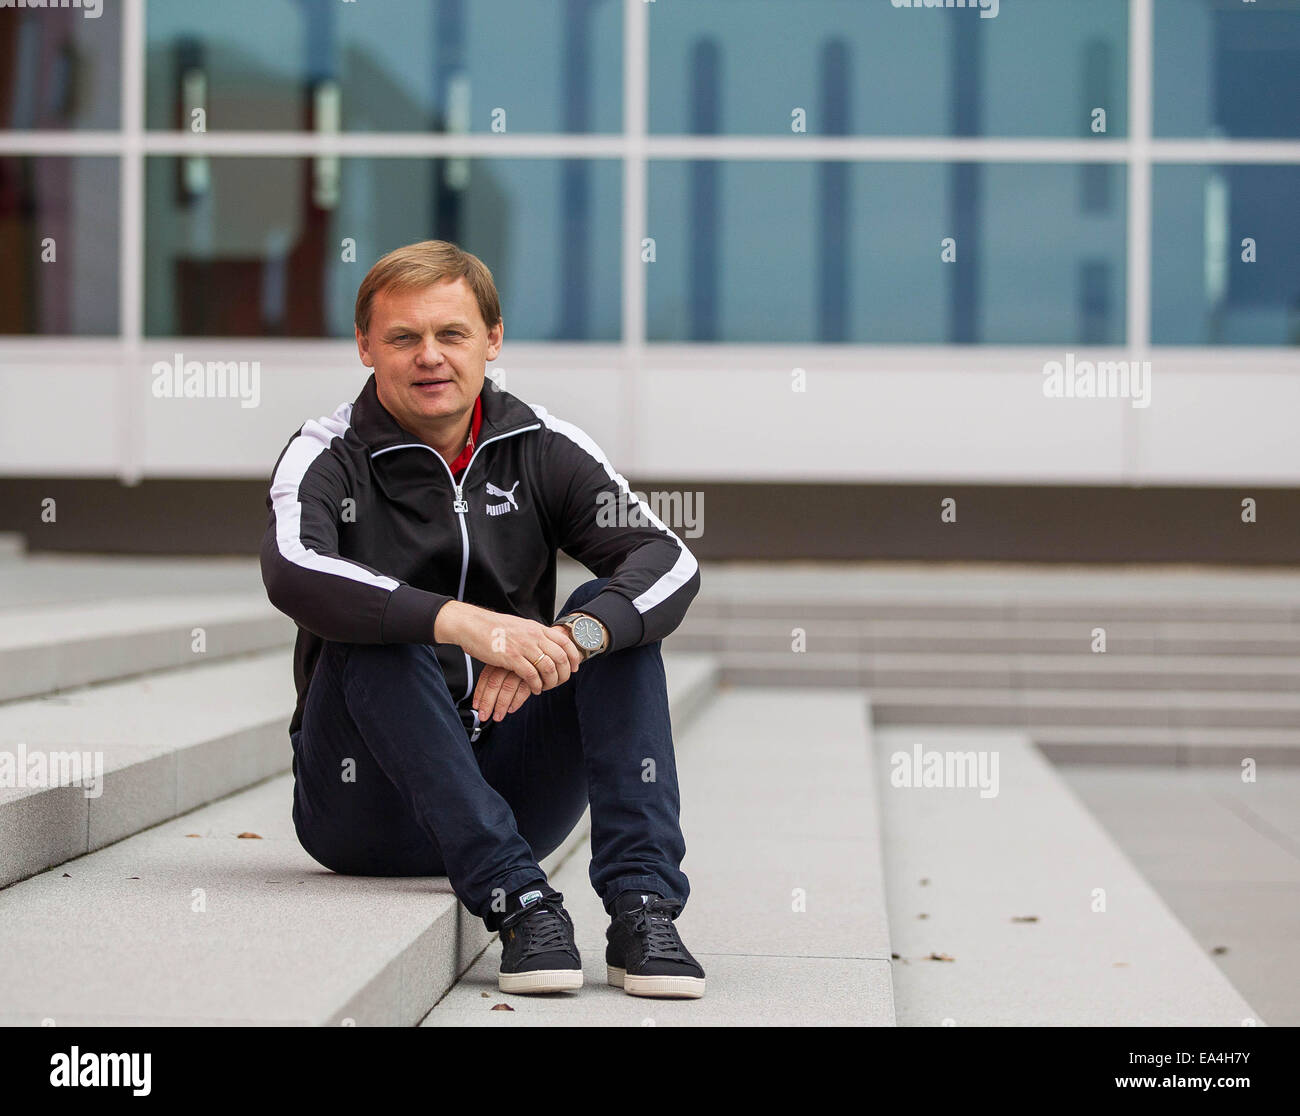 PUMA CEO Bjoern Gulden sitting on a staircase in front of PUMA headquaters  in Herzogenaurach, Germany. COMMERCIAL HANDOUT/EDITORIAL USE ONLY/NO SALES.  Please quote the source 